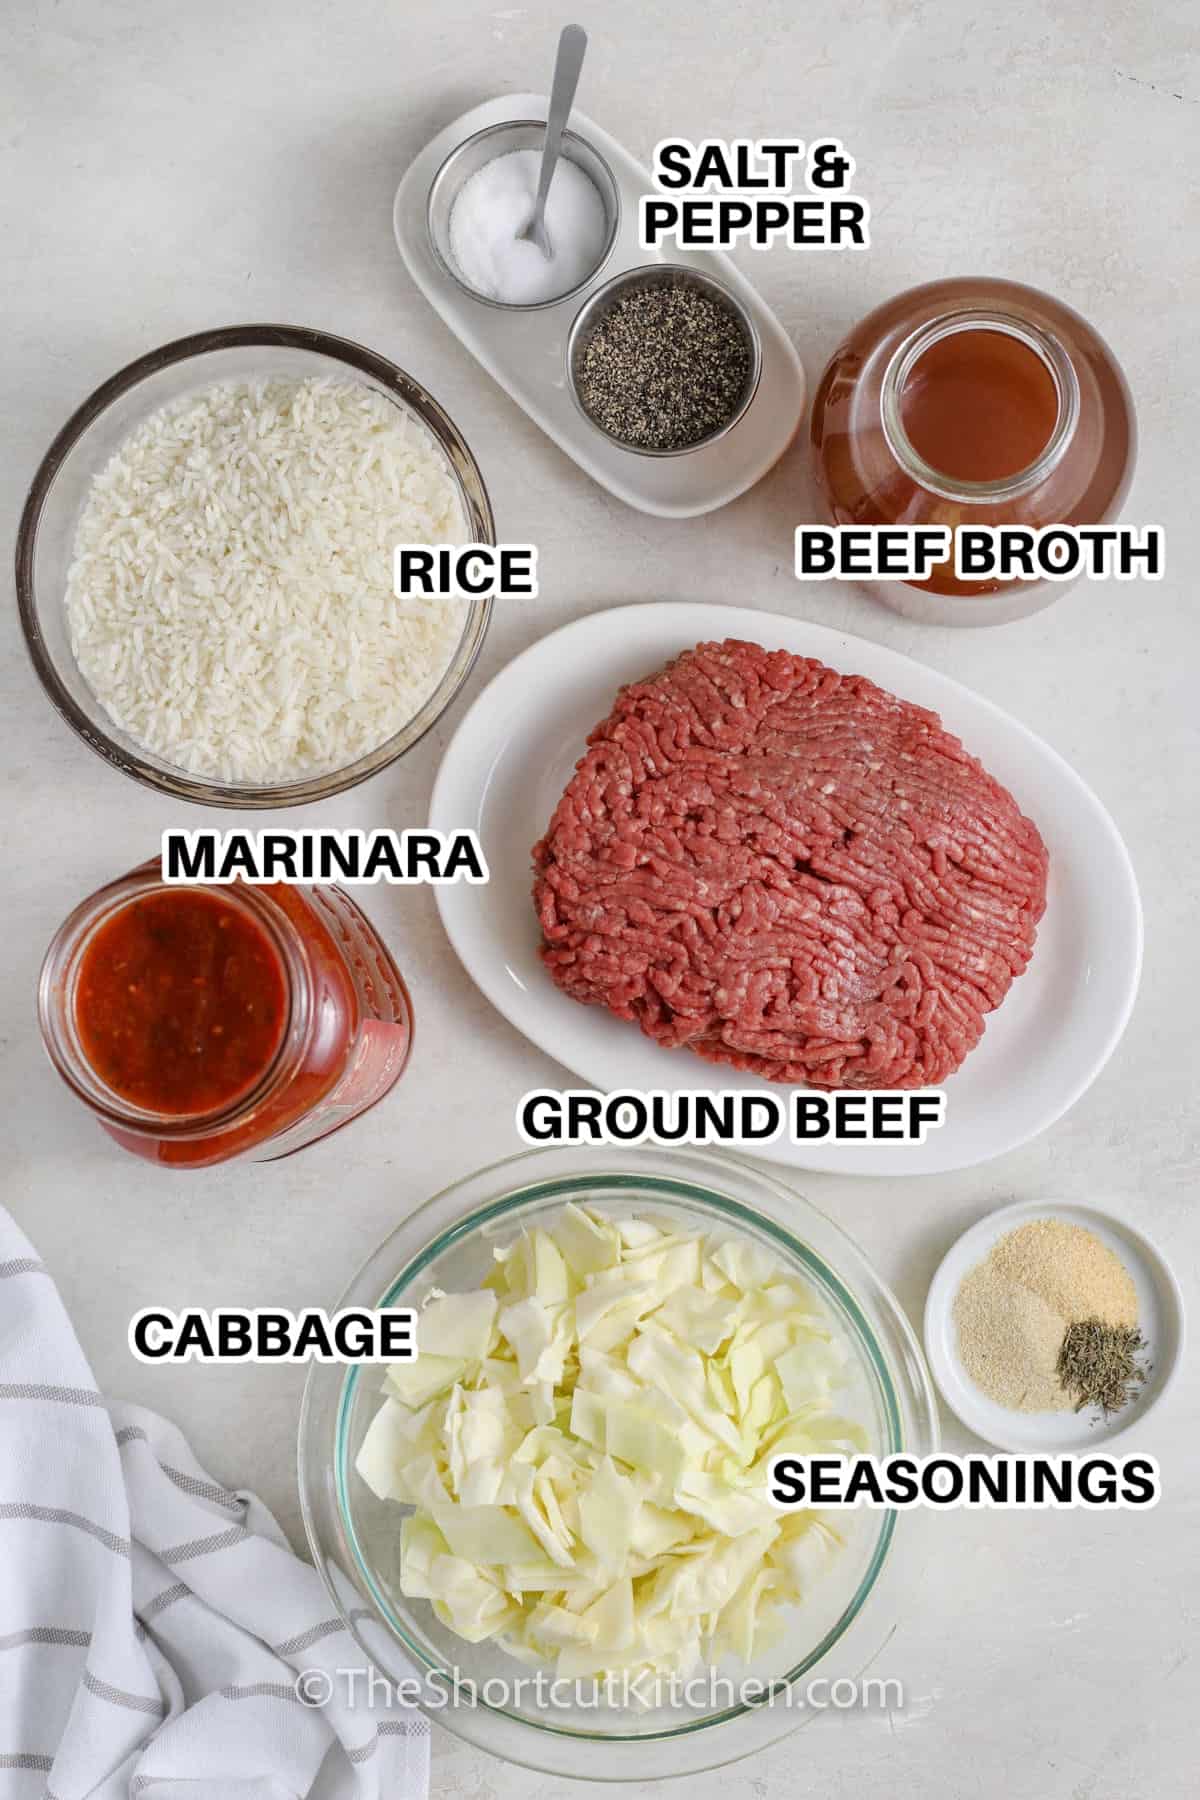 Ingredients to make Cabbage Roll Casserole labeled: salt & pepper, beef broth, rice, marinara, ground beef, cabbage, and seasonings